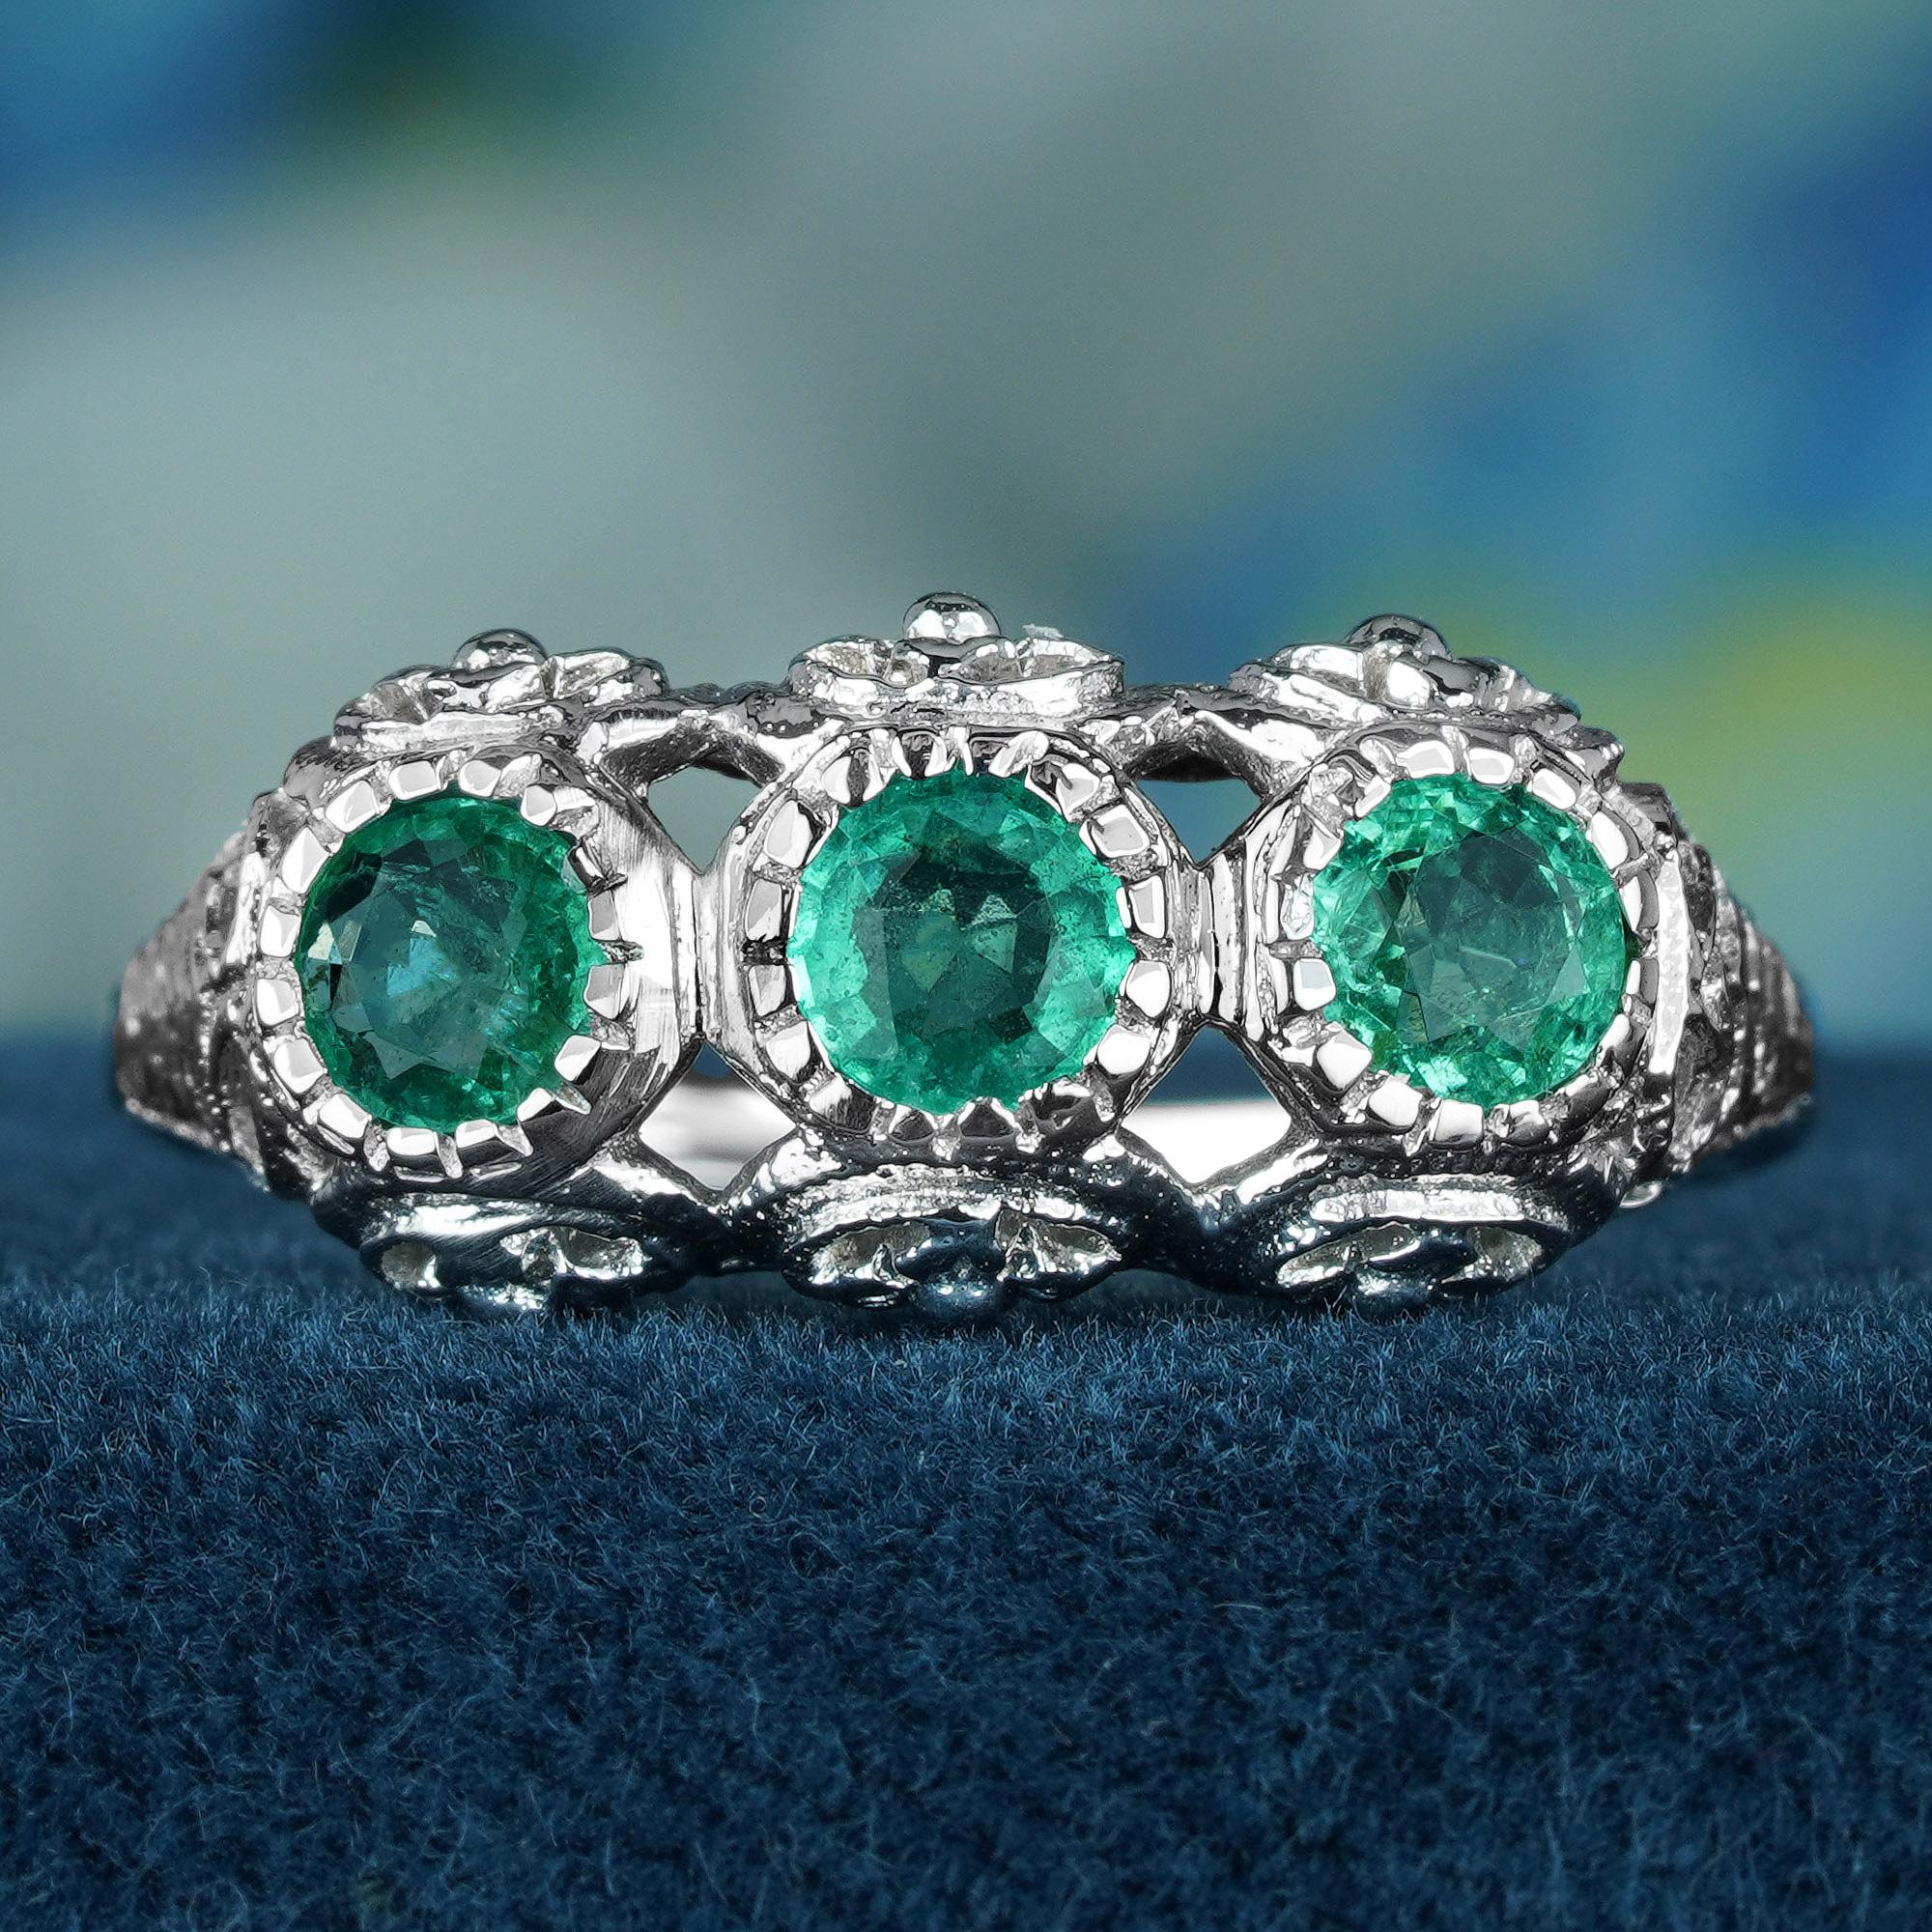 The antique style white gold ring glimmers reminiscent of moonlight glistening on snow, with the detailed filigree winding around the three emeralds like celestial lace woven by starlight. The trio emeralds, a captivating visual feast, display lush